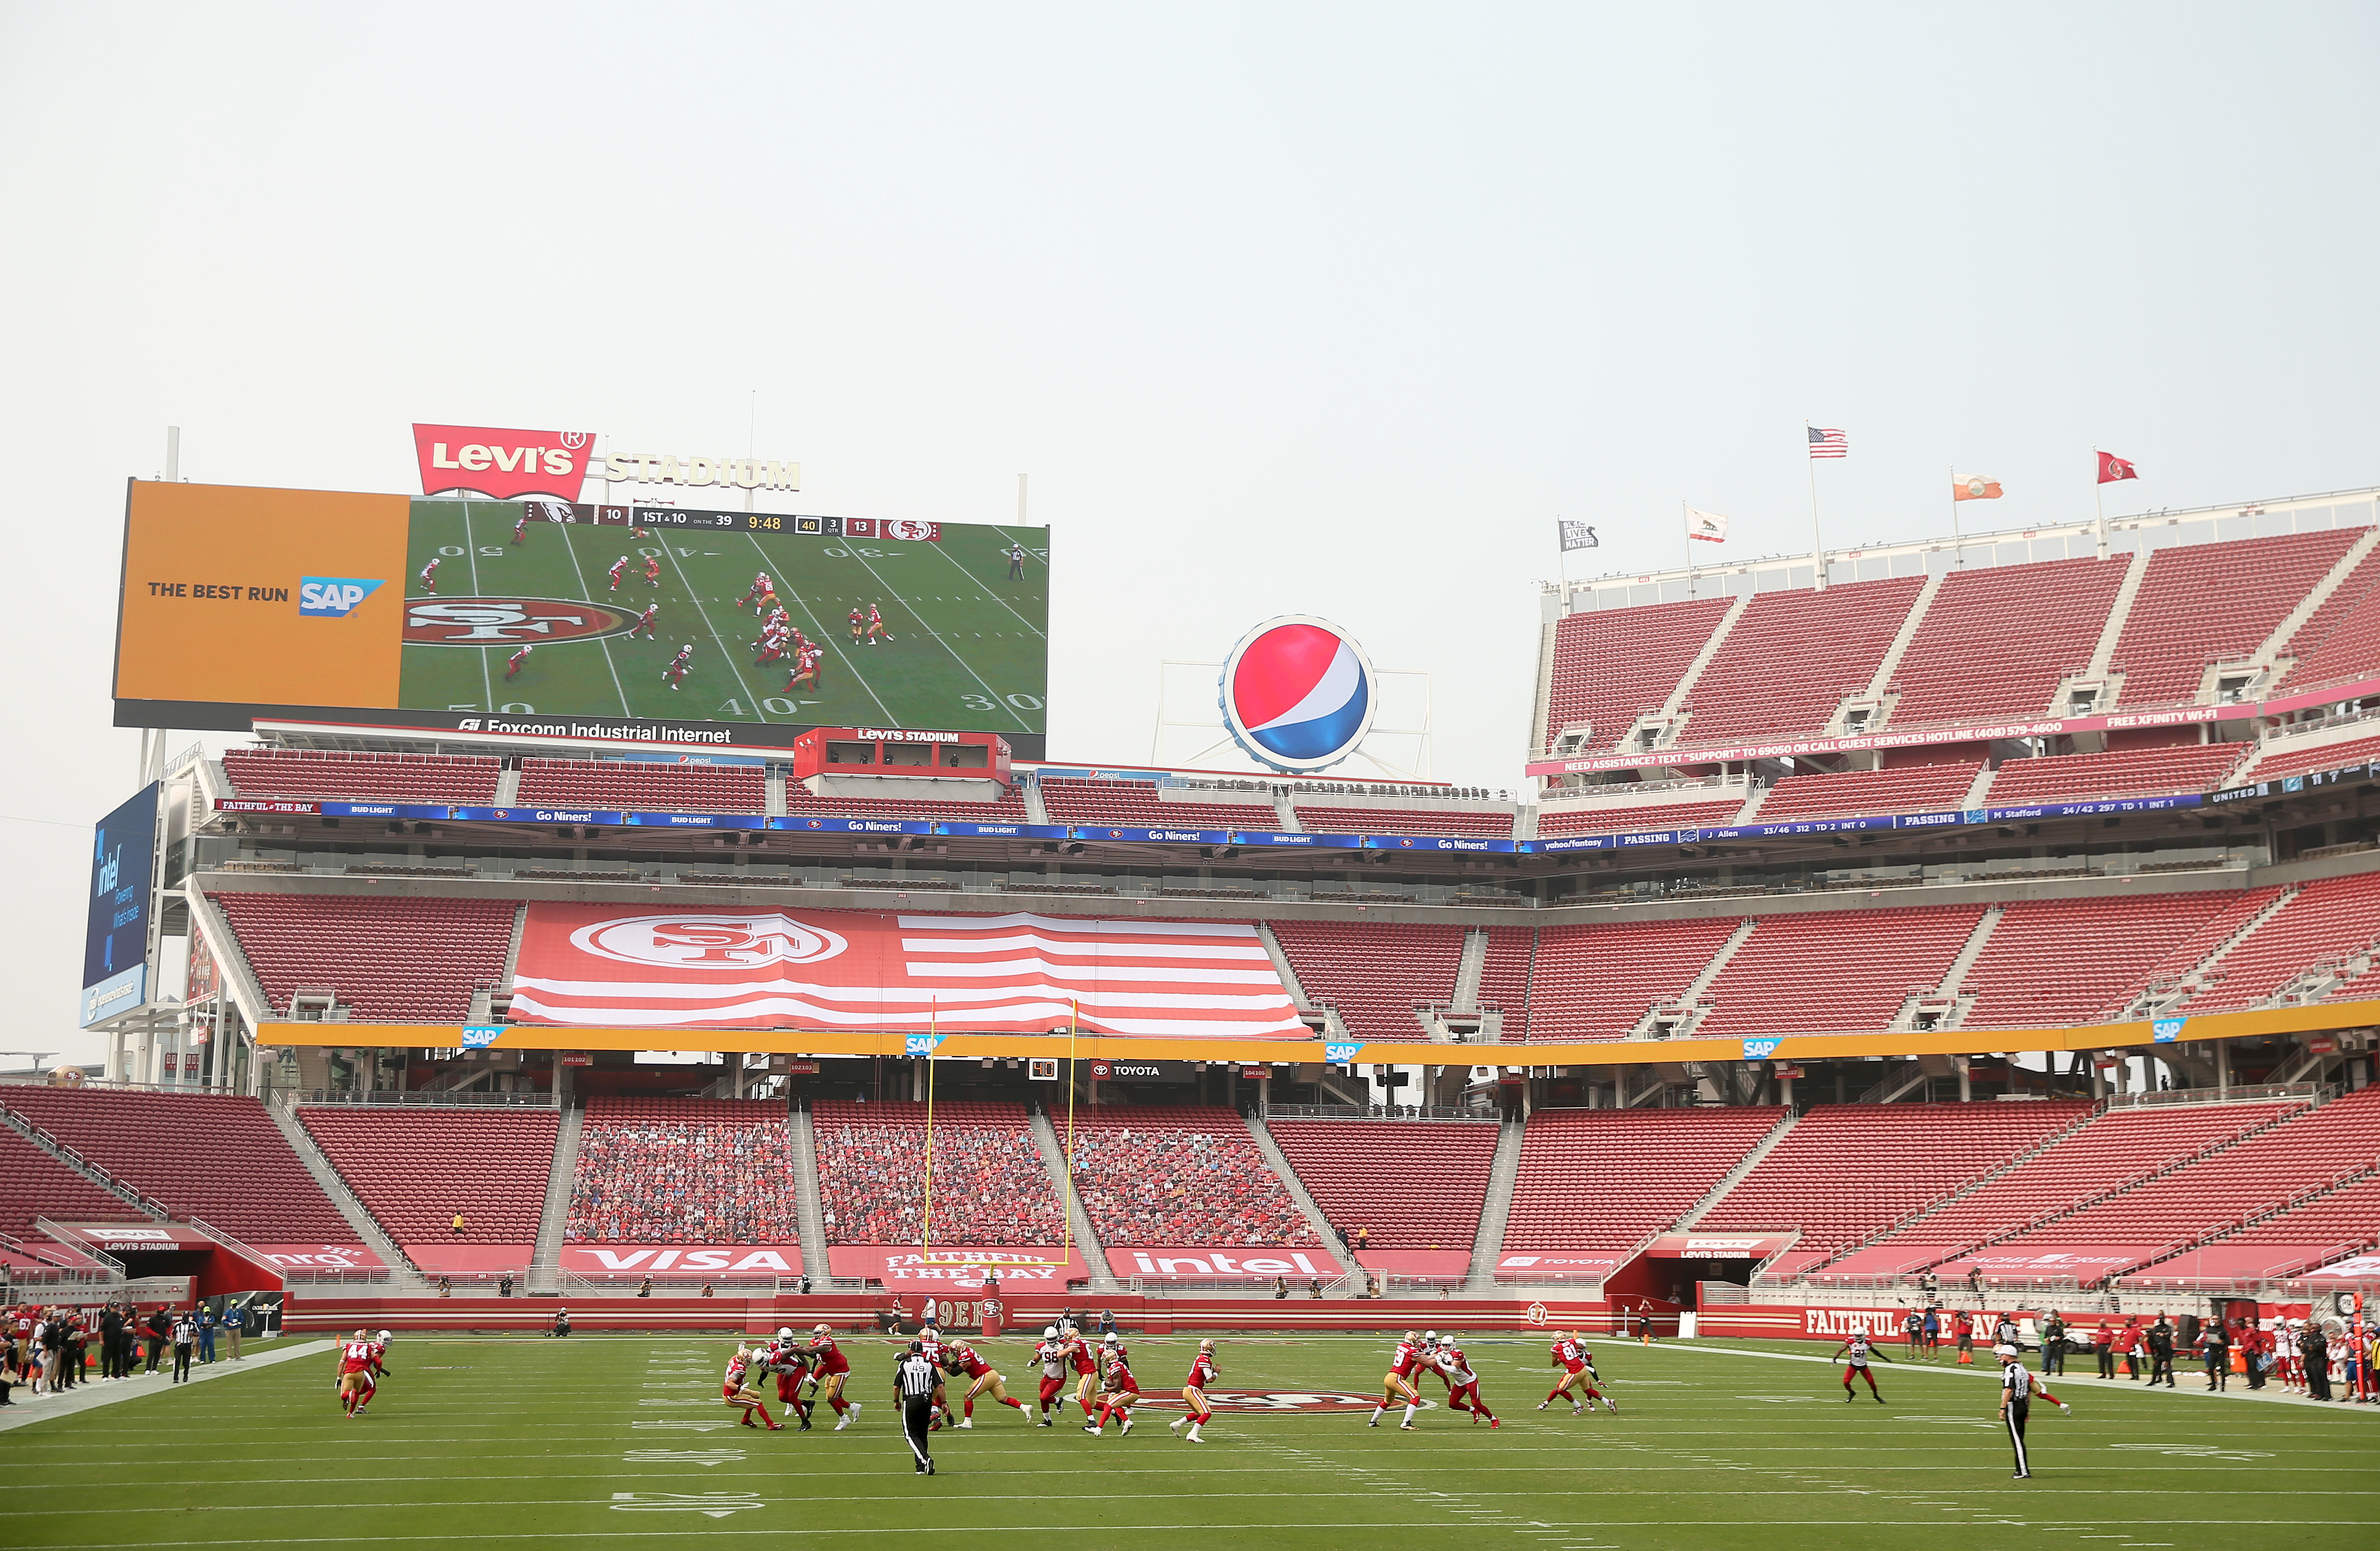 how to watch cardinals vs 49ers